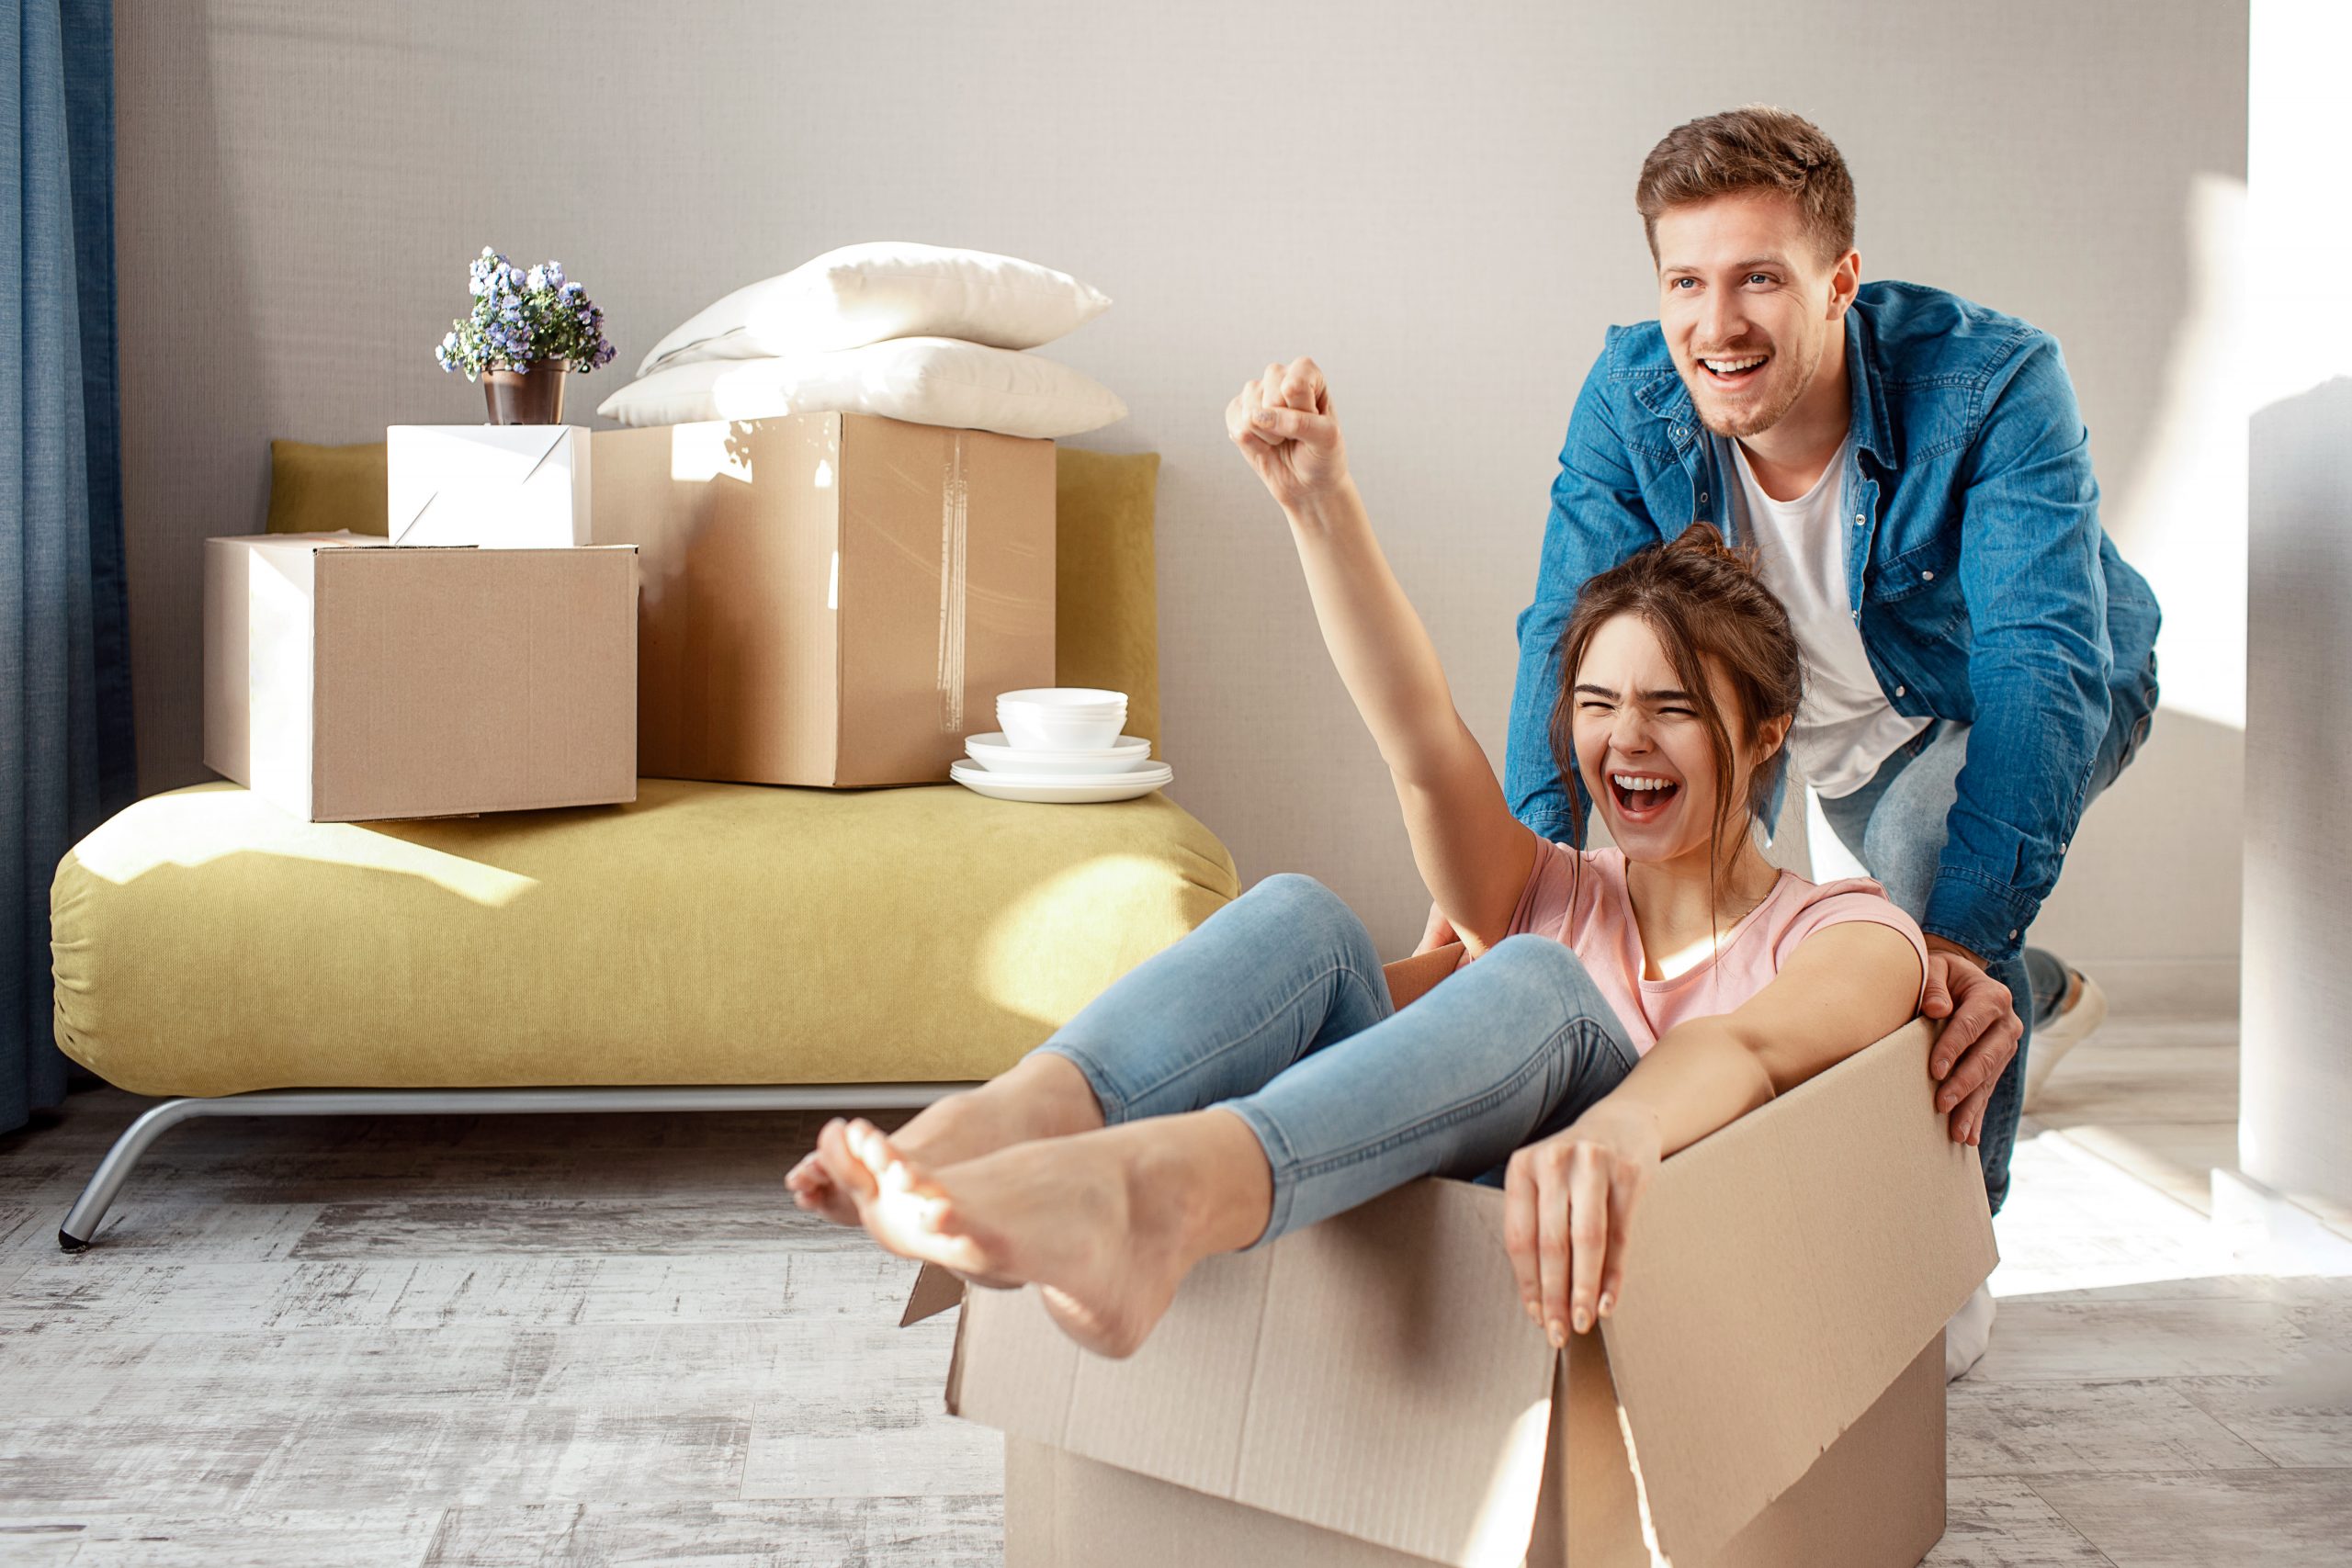 Young family couple bought or rented their first small apartment. Cheerful woman scream sitting in box. Guy move her. They play game during moving in